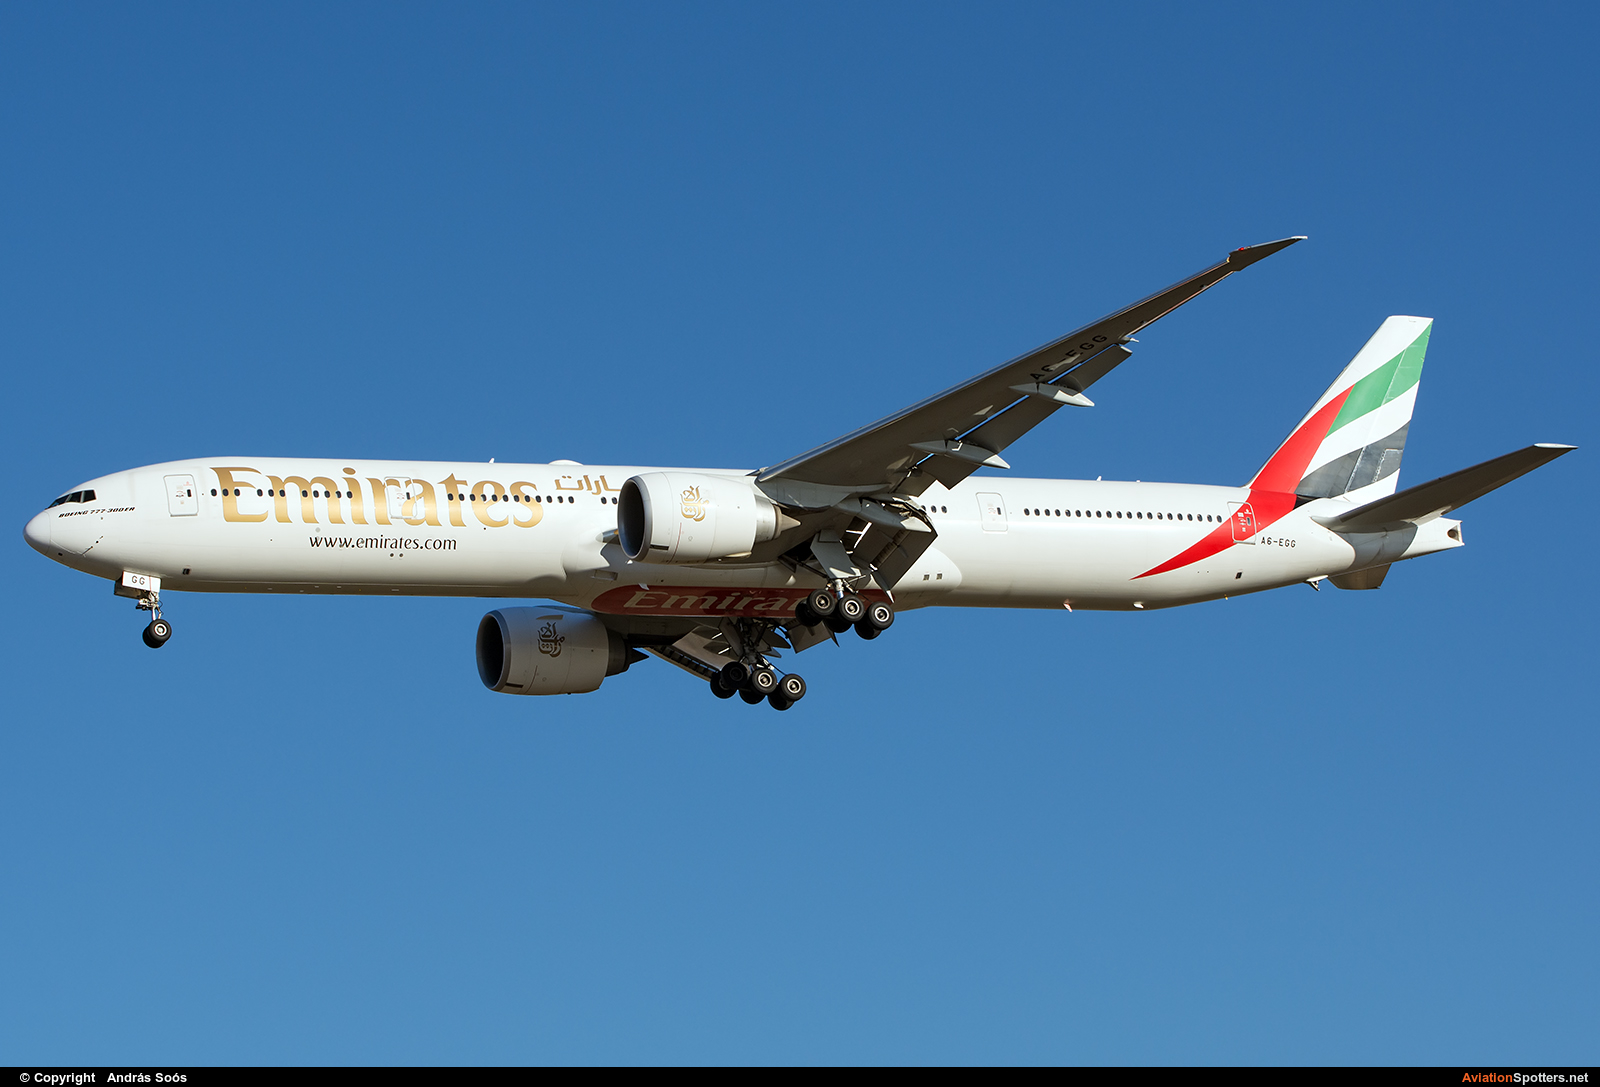 Emirates Airlines  -  777-300ER  (A6-EGG) By András Soós (sas1965)